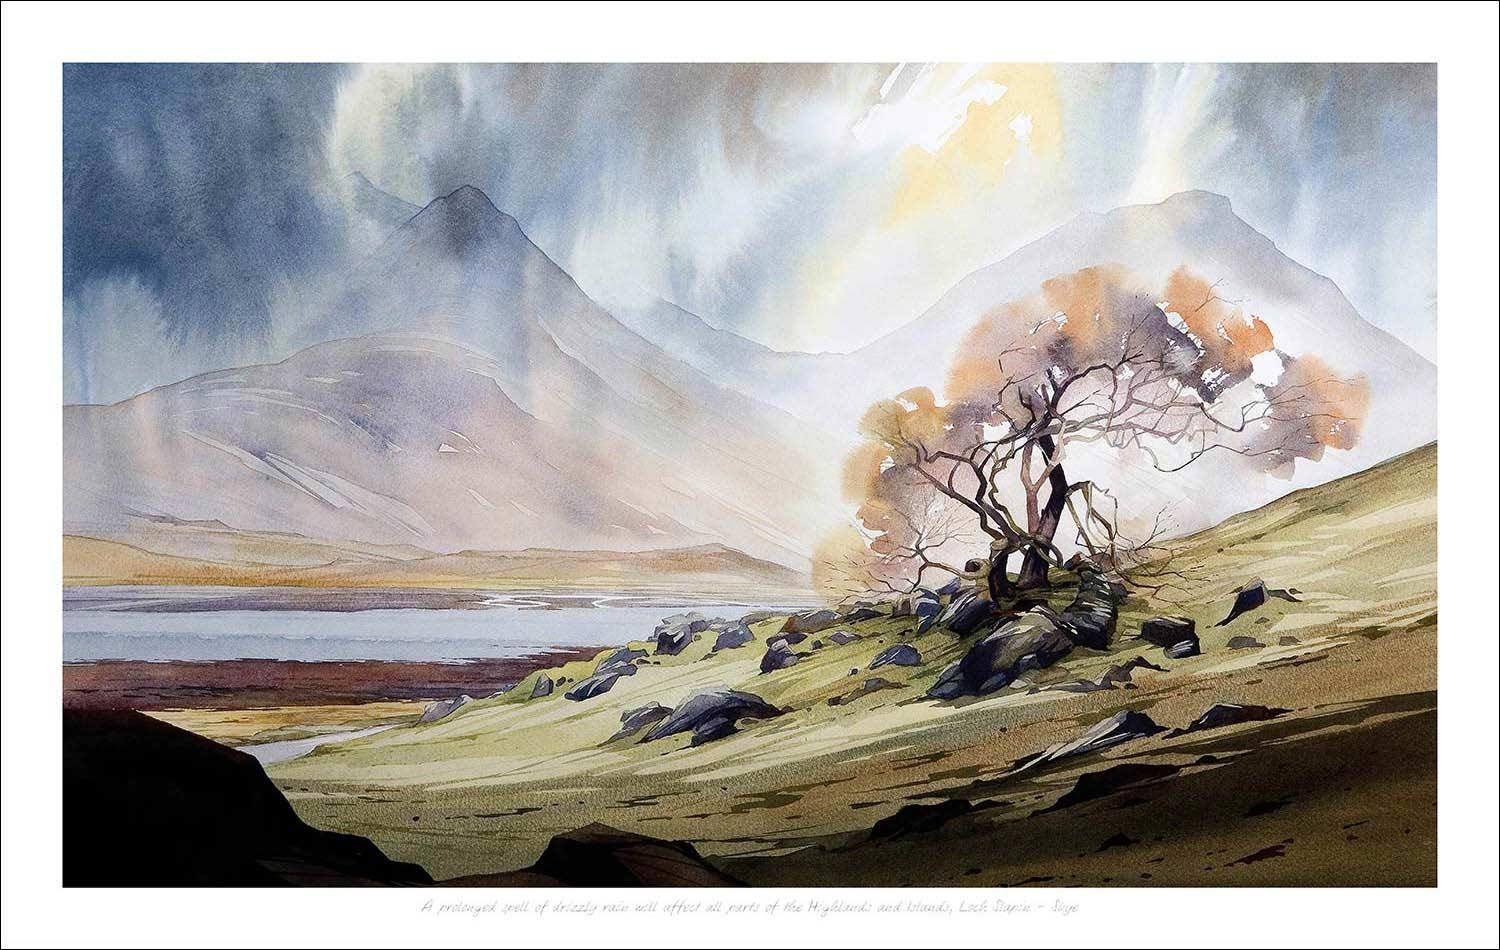 A prolonged spell of drizzly rain will affect all parts of the Highlands and Islands Art Print from an original painting by artist Peter McDermott